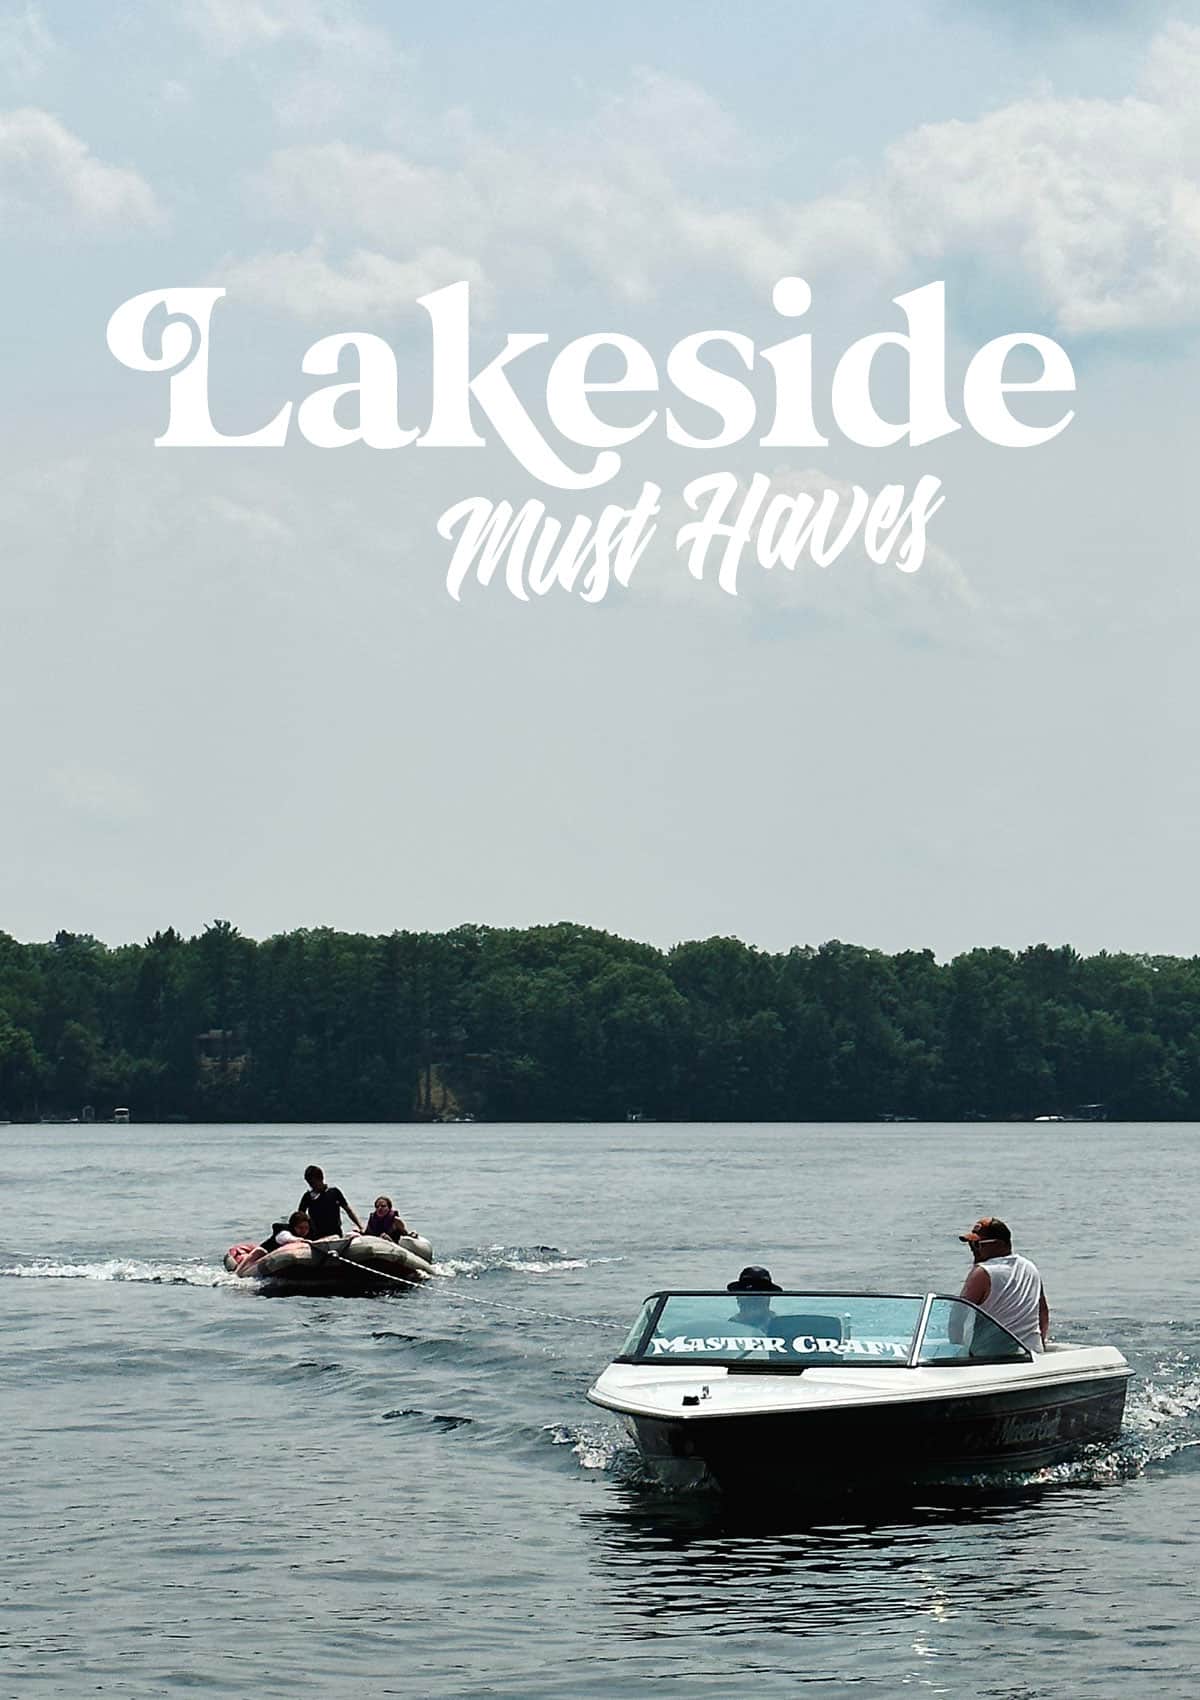 Lakeside Must Haves - Things I love to bring with me to the lake house